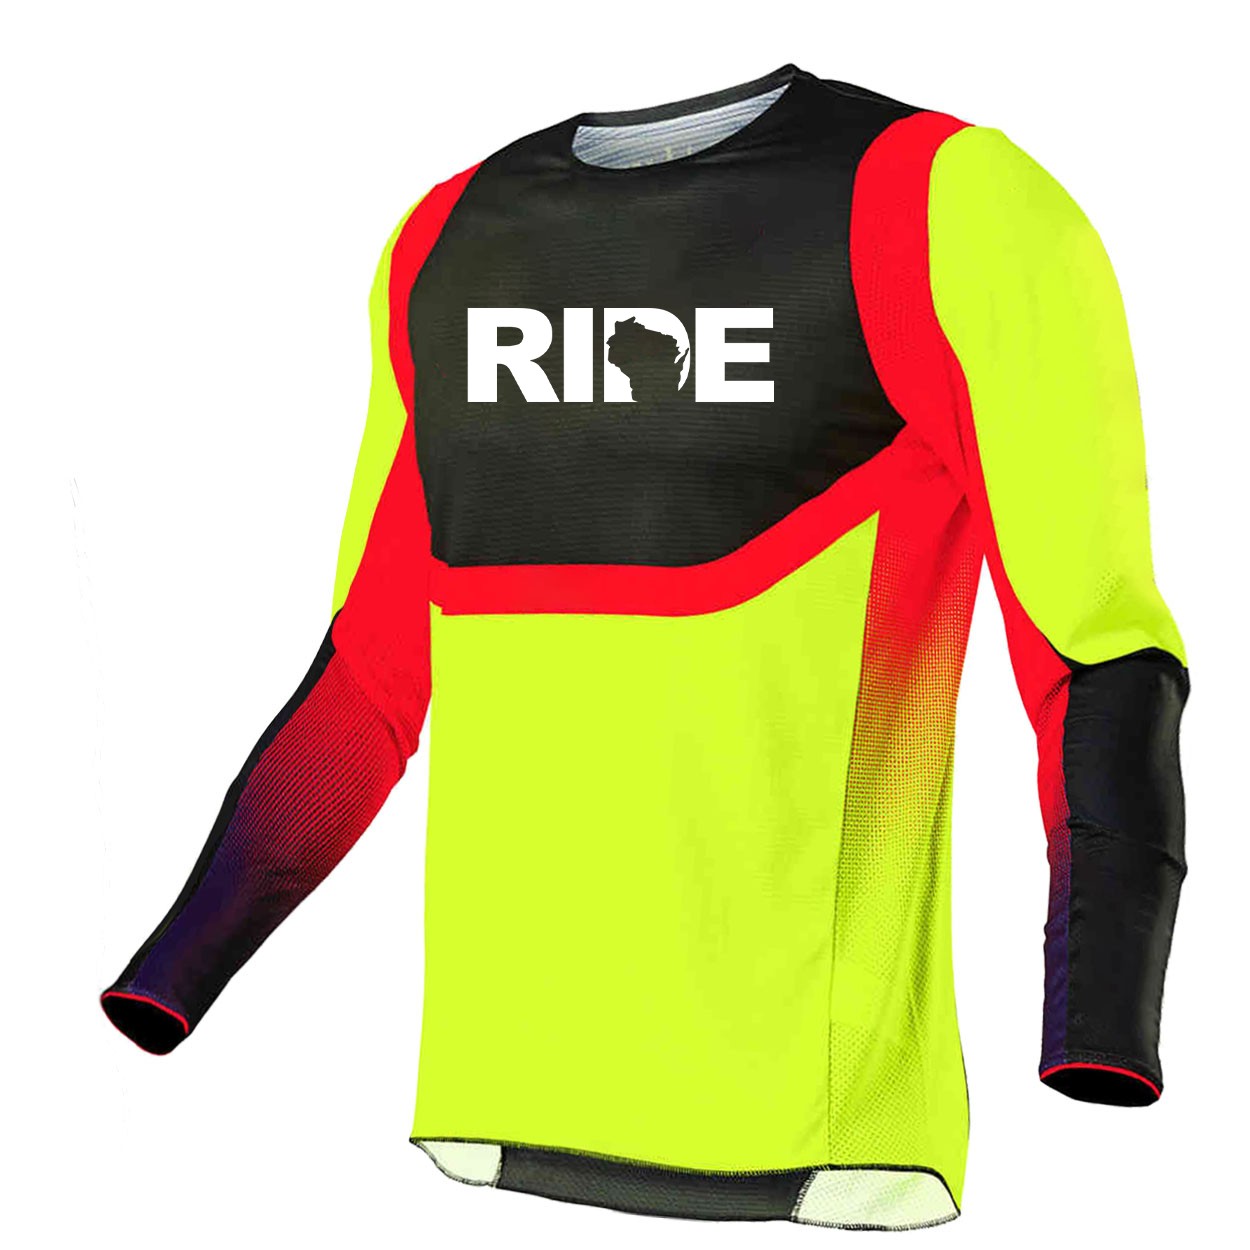 Ride Wisconsin Classic Performance Jersey Long Sleeve Shirt Black/Yellow/Red